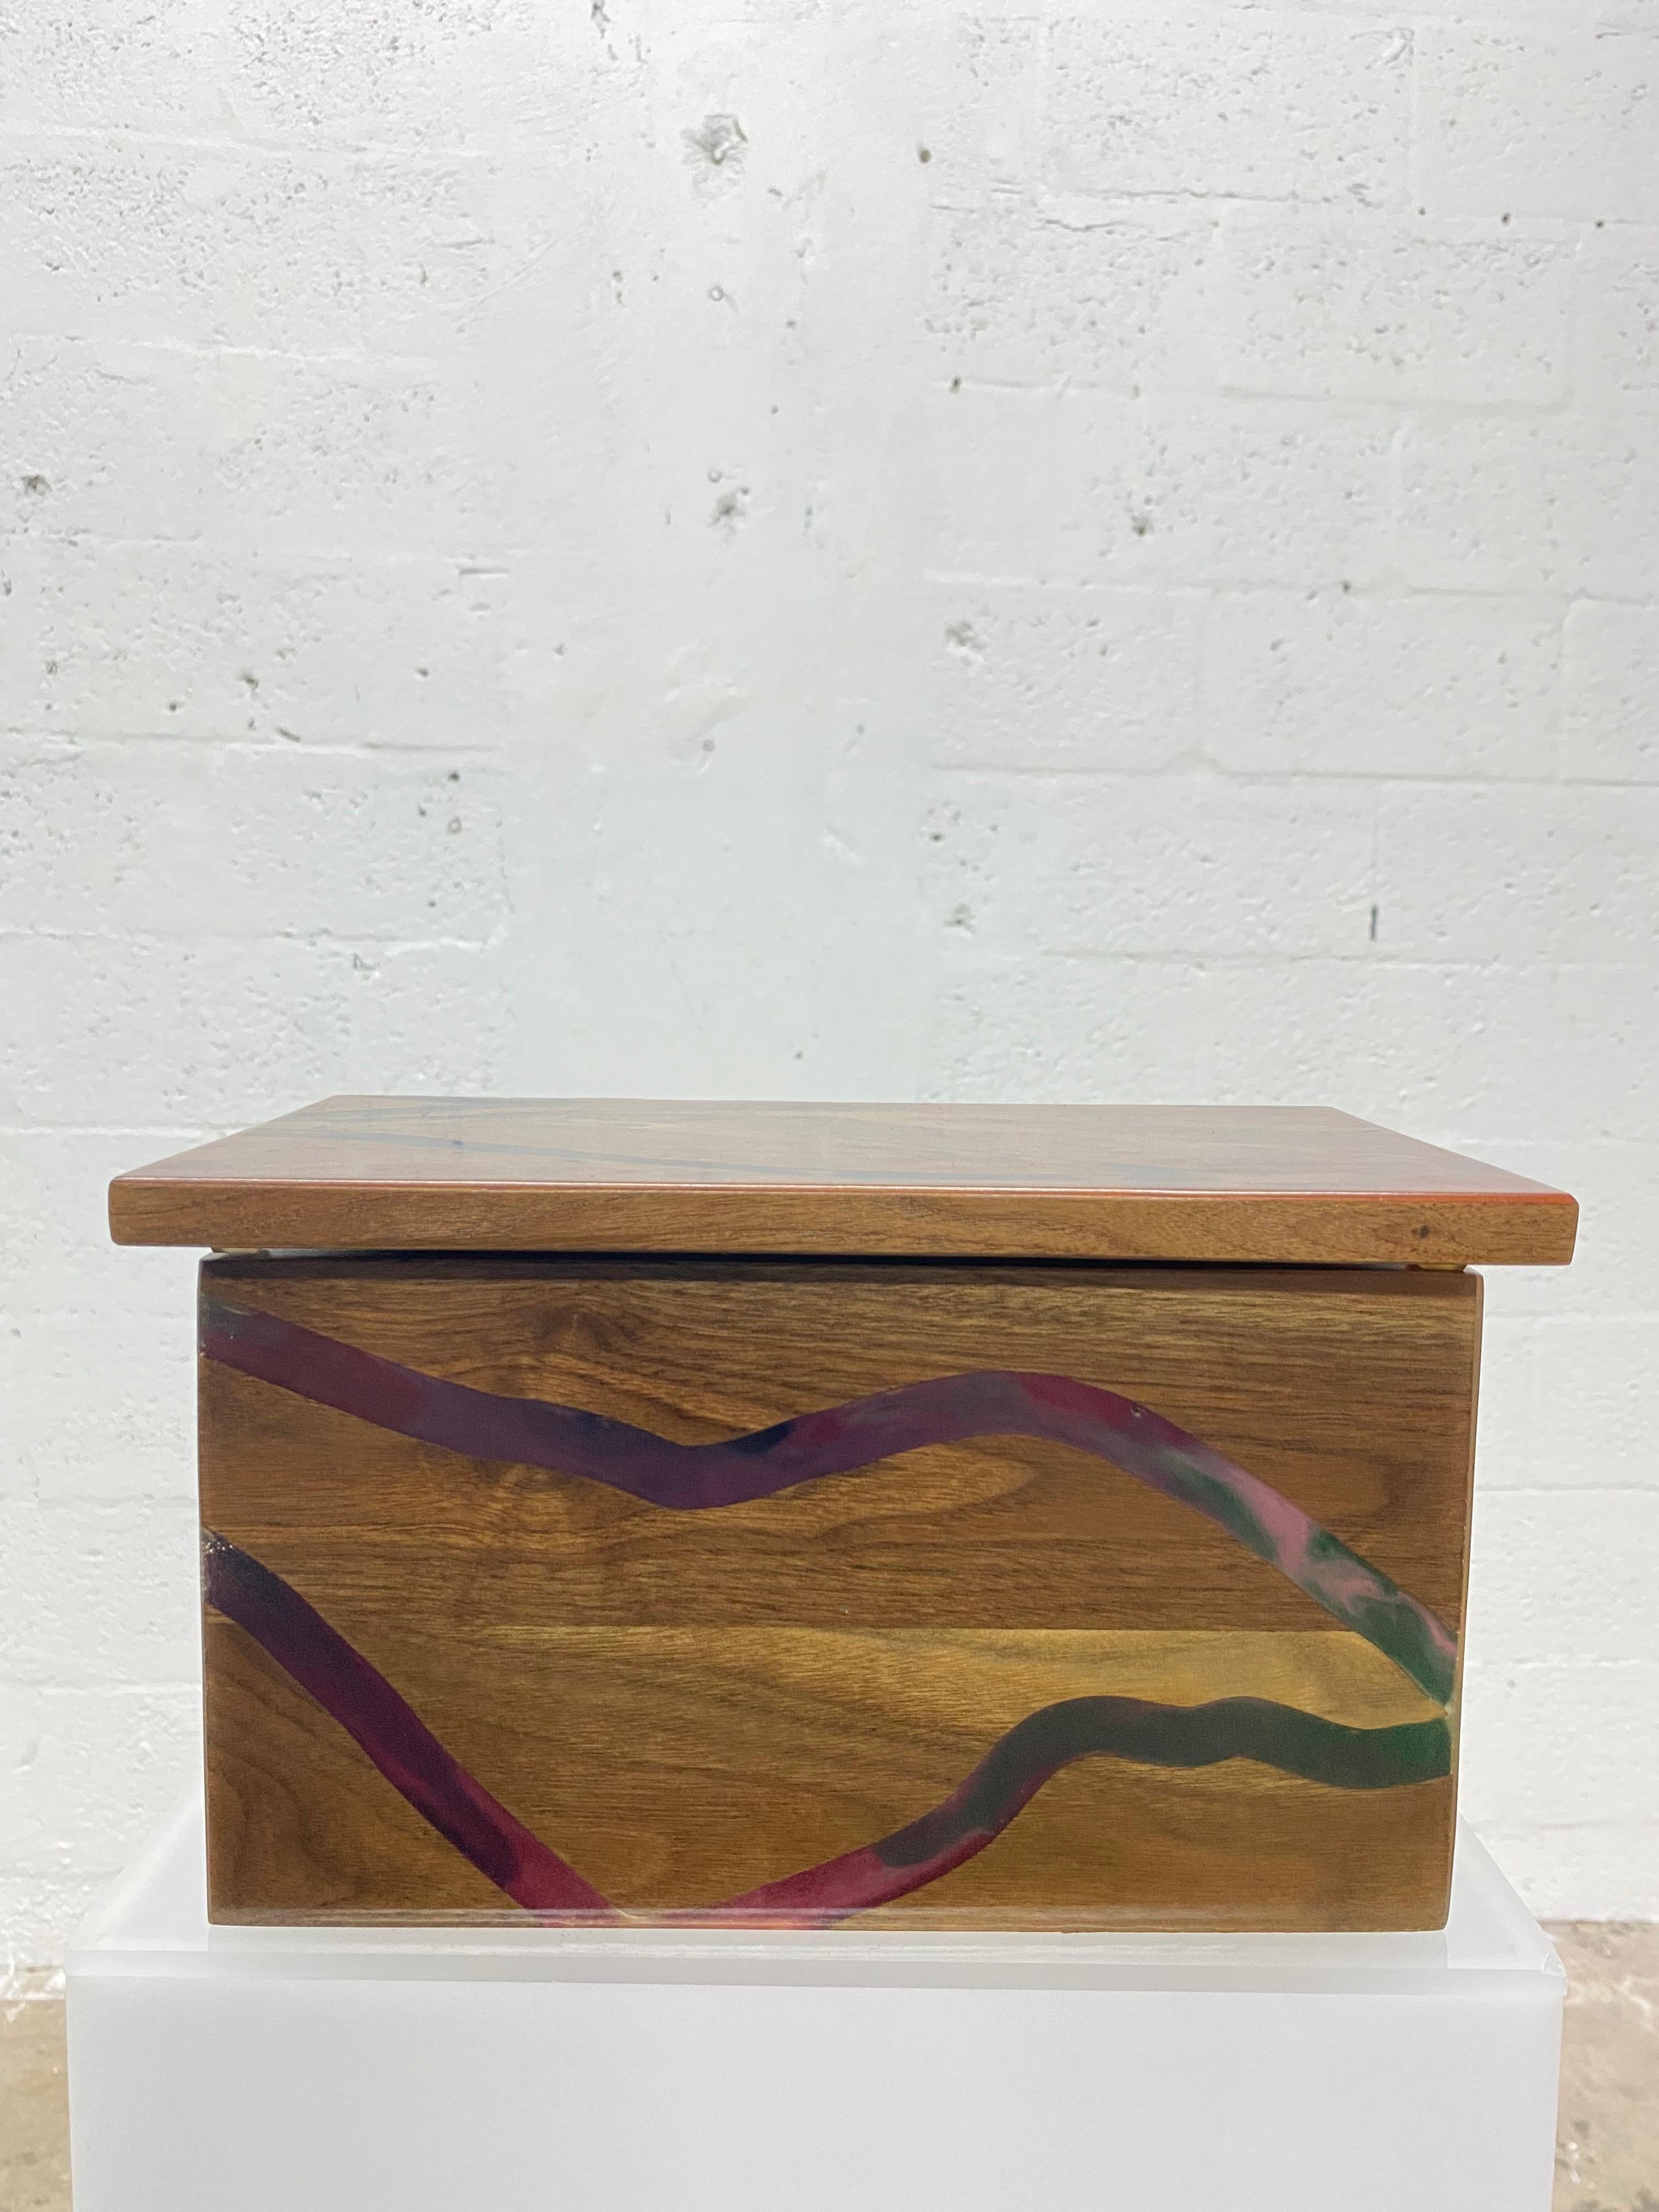 Beautiful wood and colored resin channeled storage box with brass hinge.